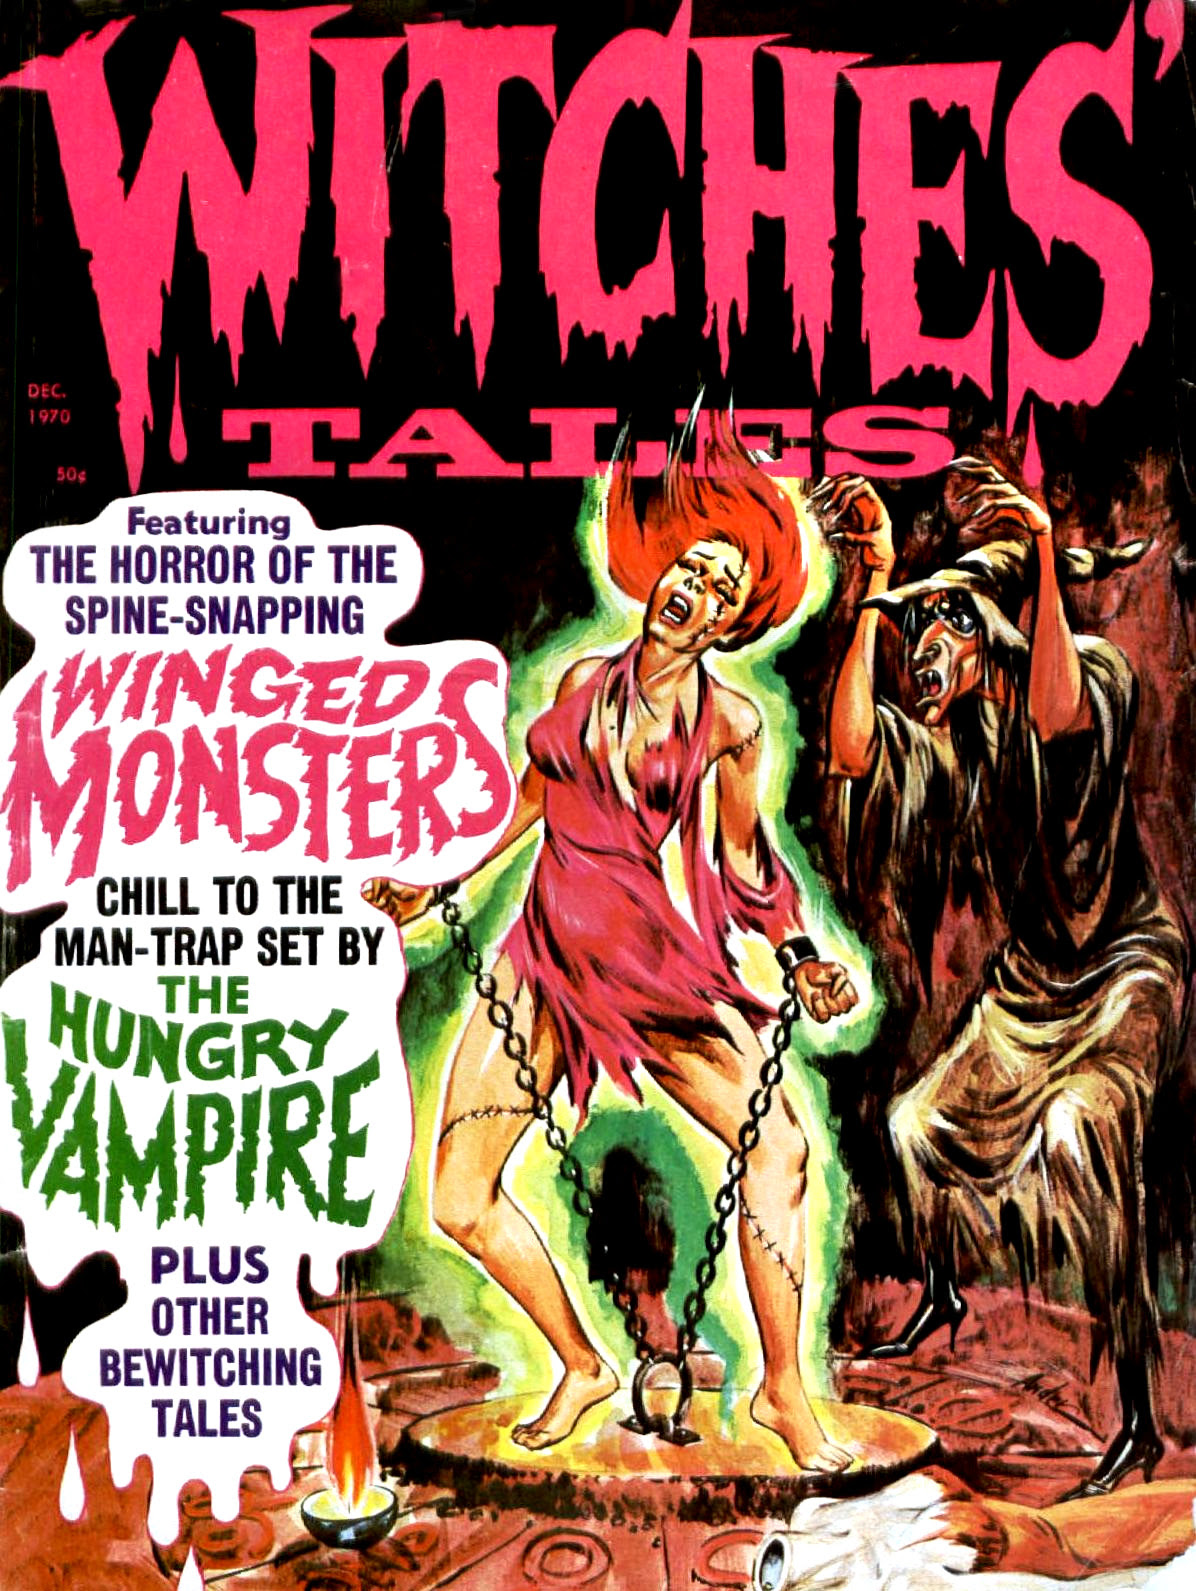 Witches' Tales Vol. 2 #6 (Eerie Publications 1970) 